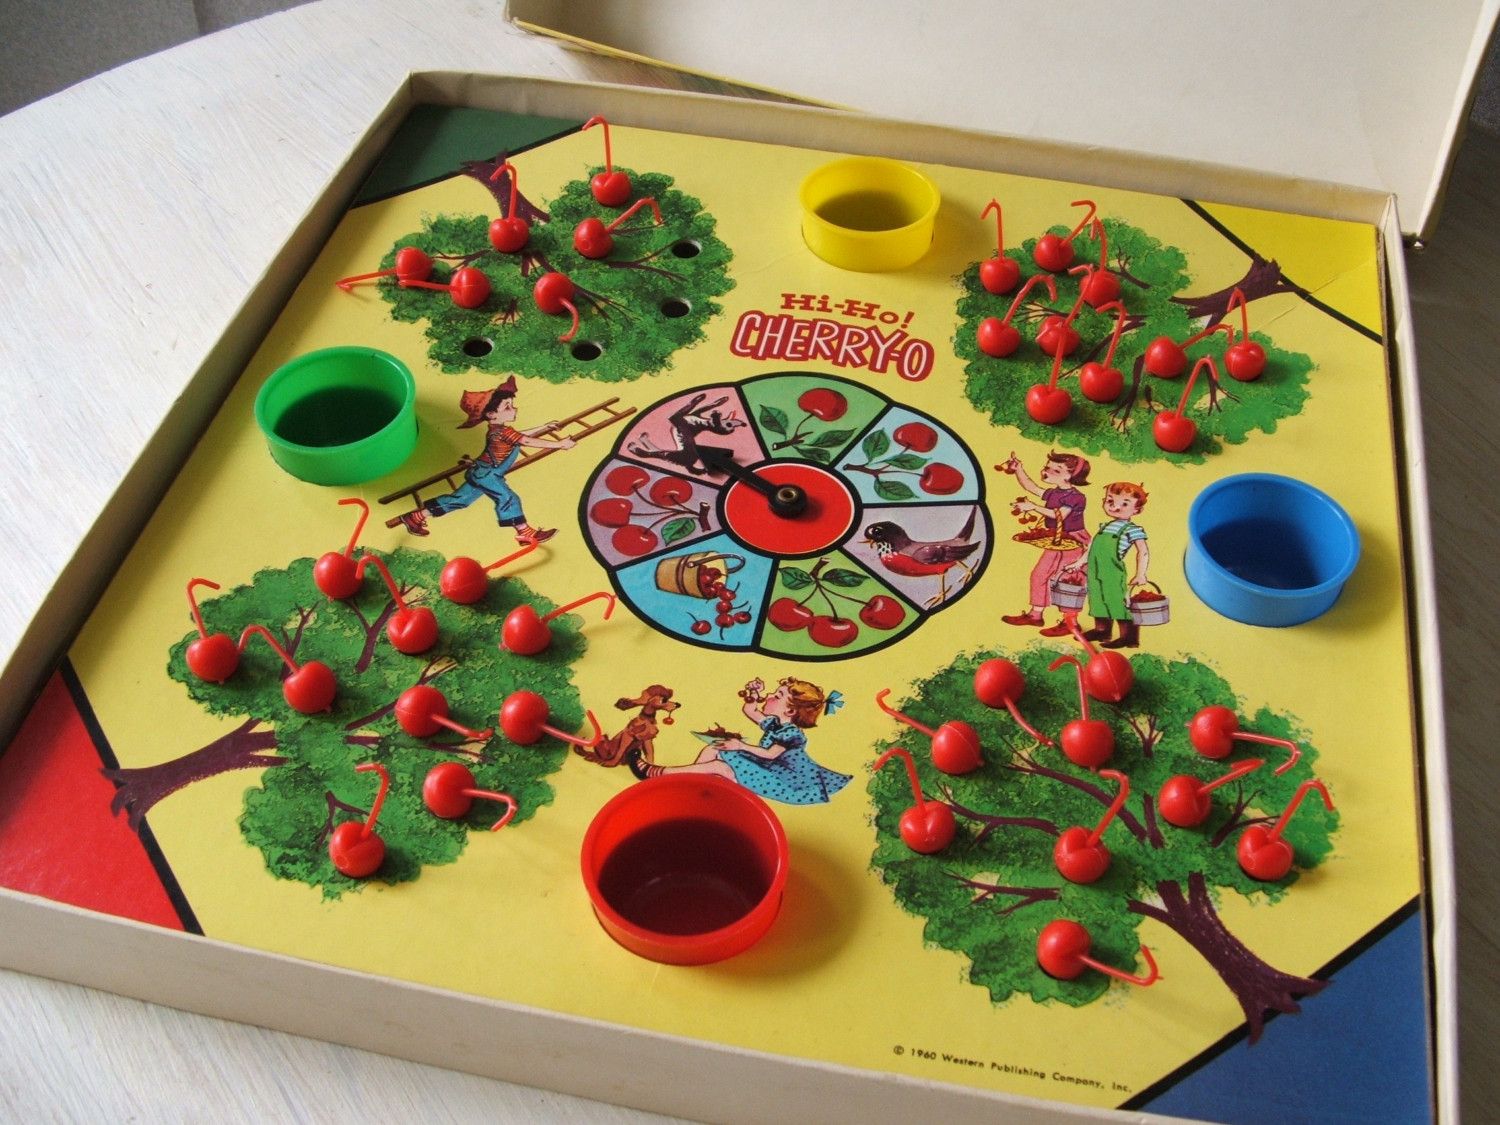 hi-ho cherry-o is a perfect game for counting